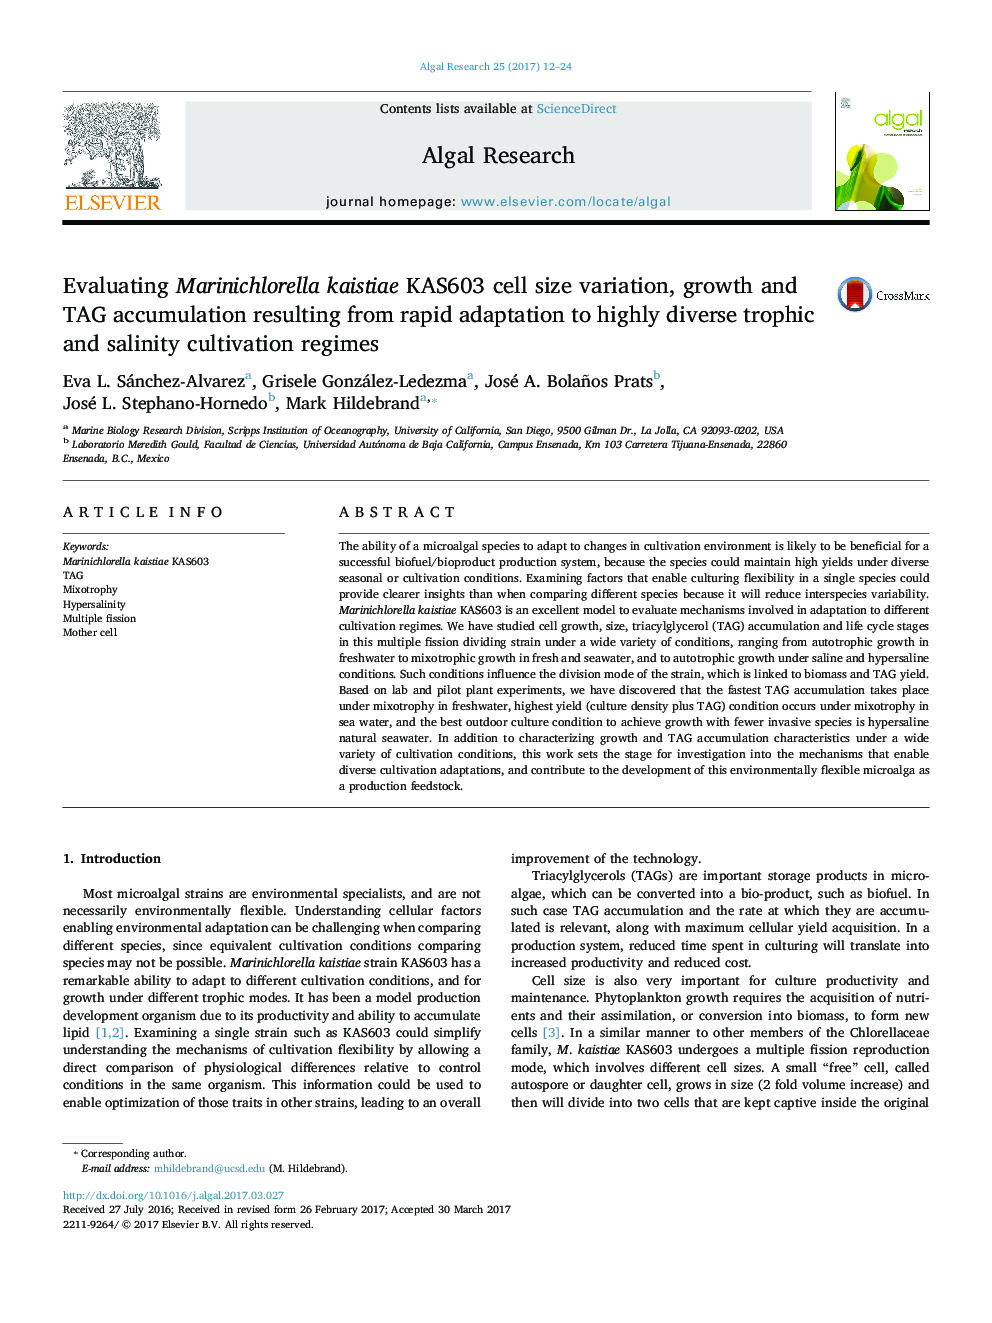 Evaluating Marinichlorella kaistiae KAS603 cell size variation, growth and TAG accumulation resulting from rapid adaptation to highly diverse trophic and salinity cultivation regimes